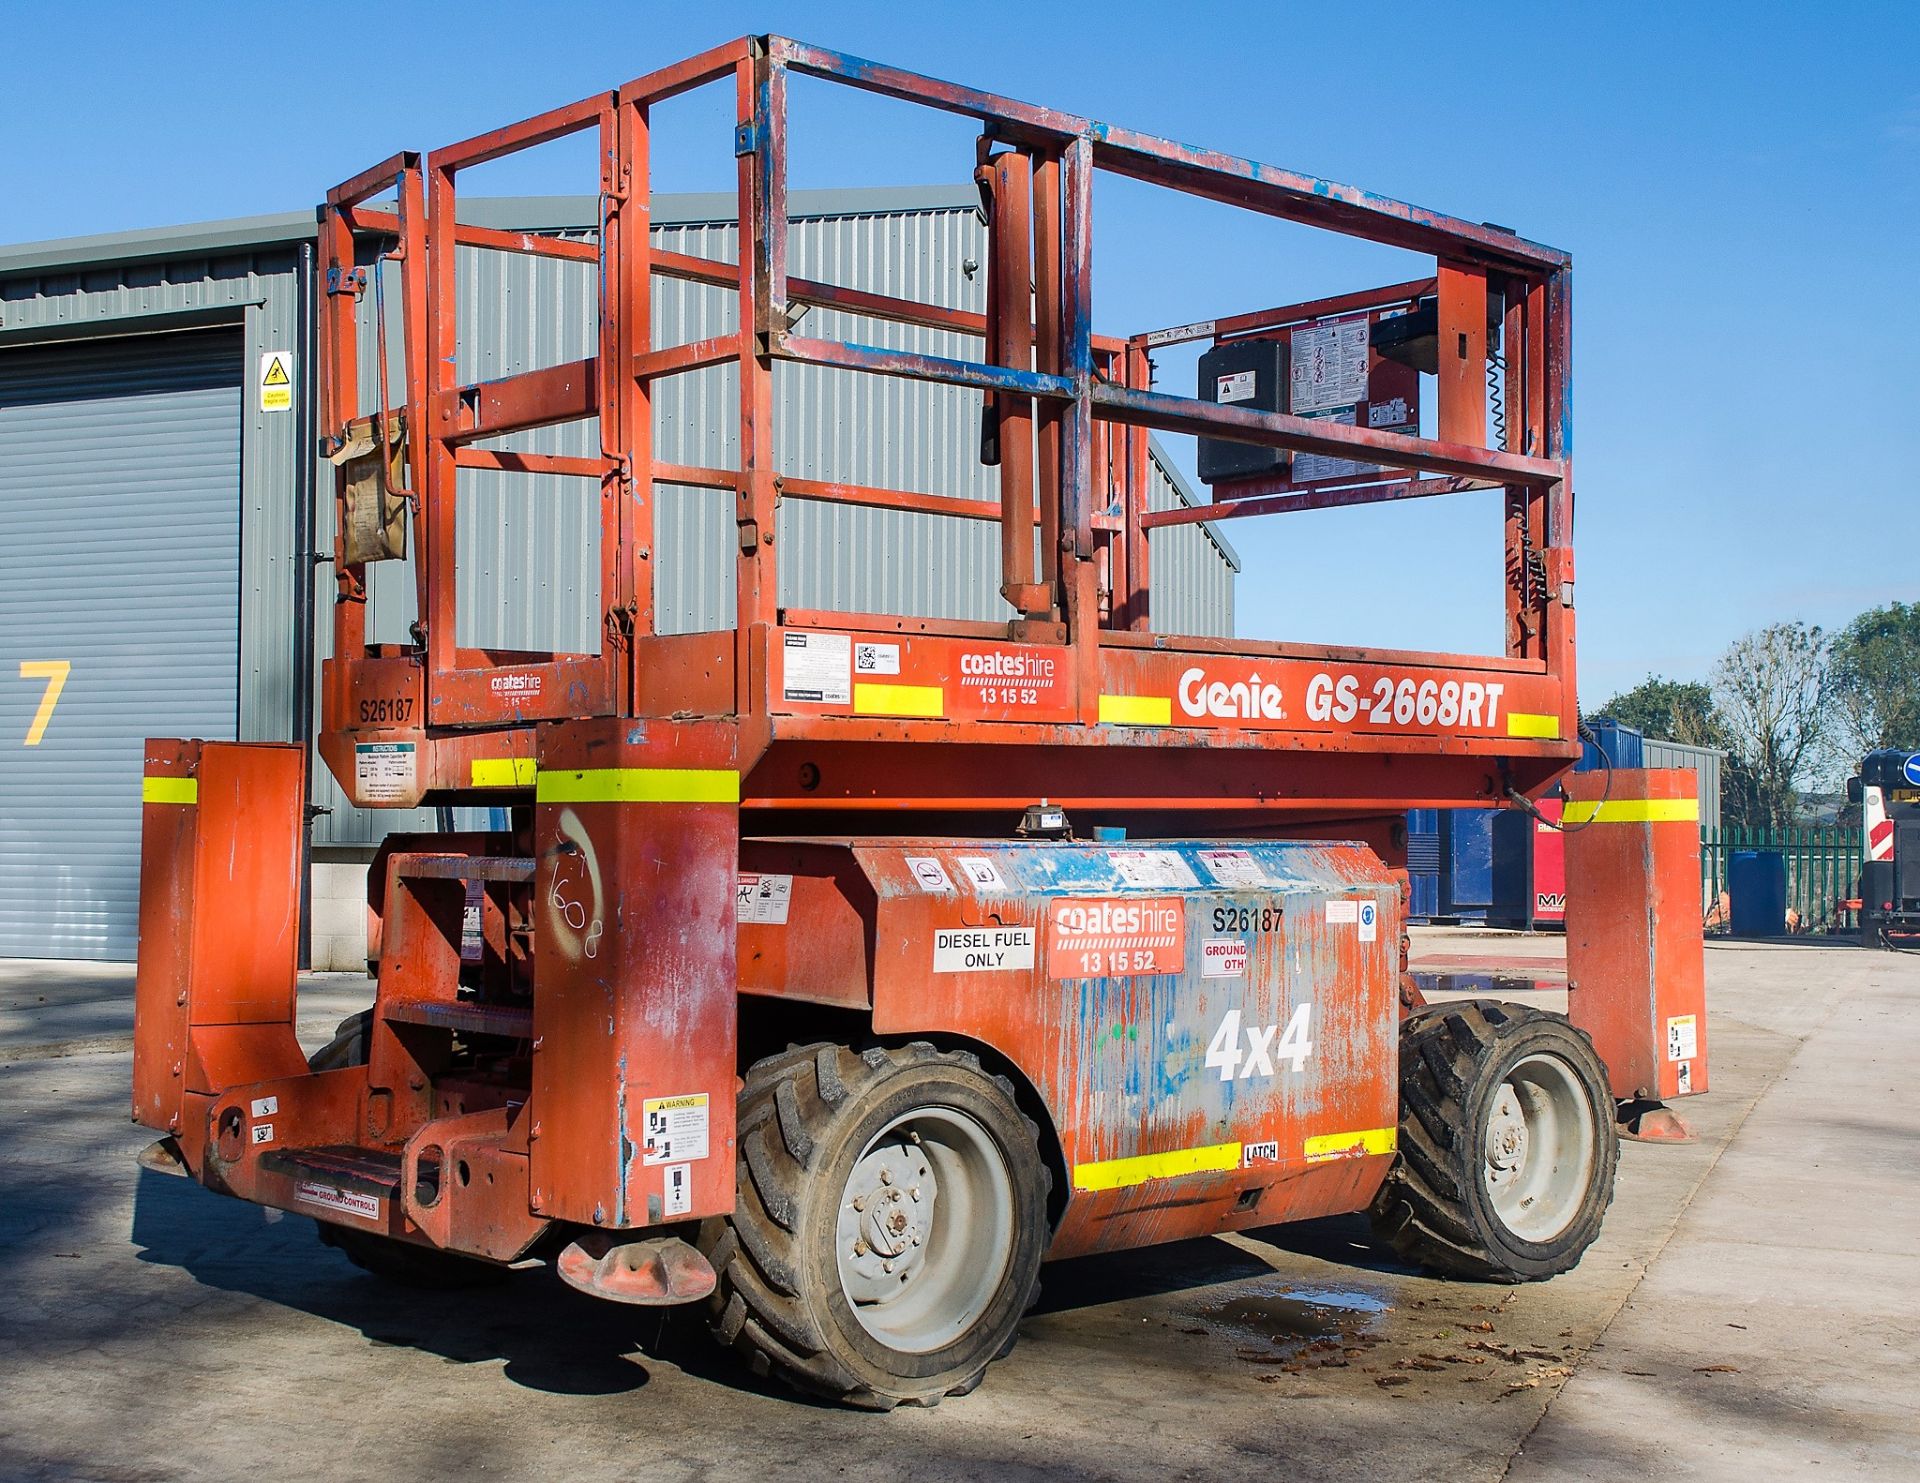 Genie GS - 2668 RT diesel driven 4 x 4 scissor lift  Year: 2006 S/N: GS6086-47270 Recorded Hours: - Image 3 of 18